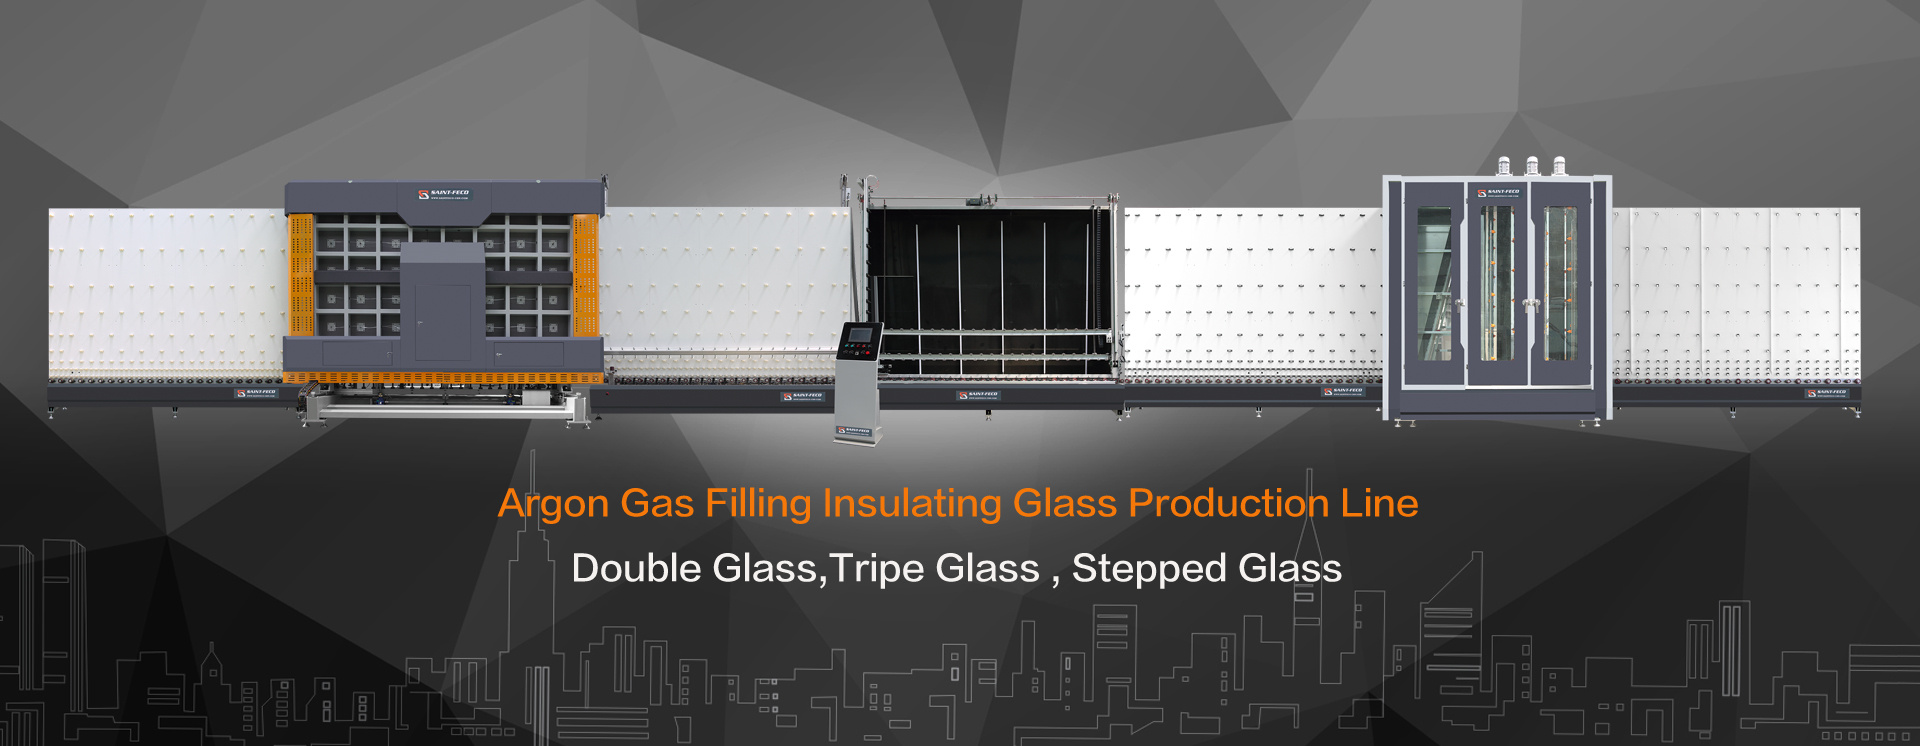 Argon Gas Filling Insulating Glass Production Line